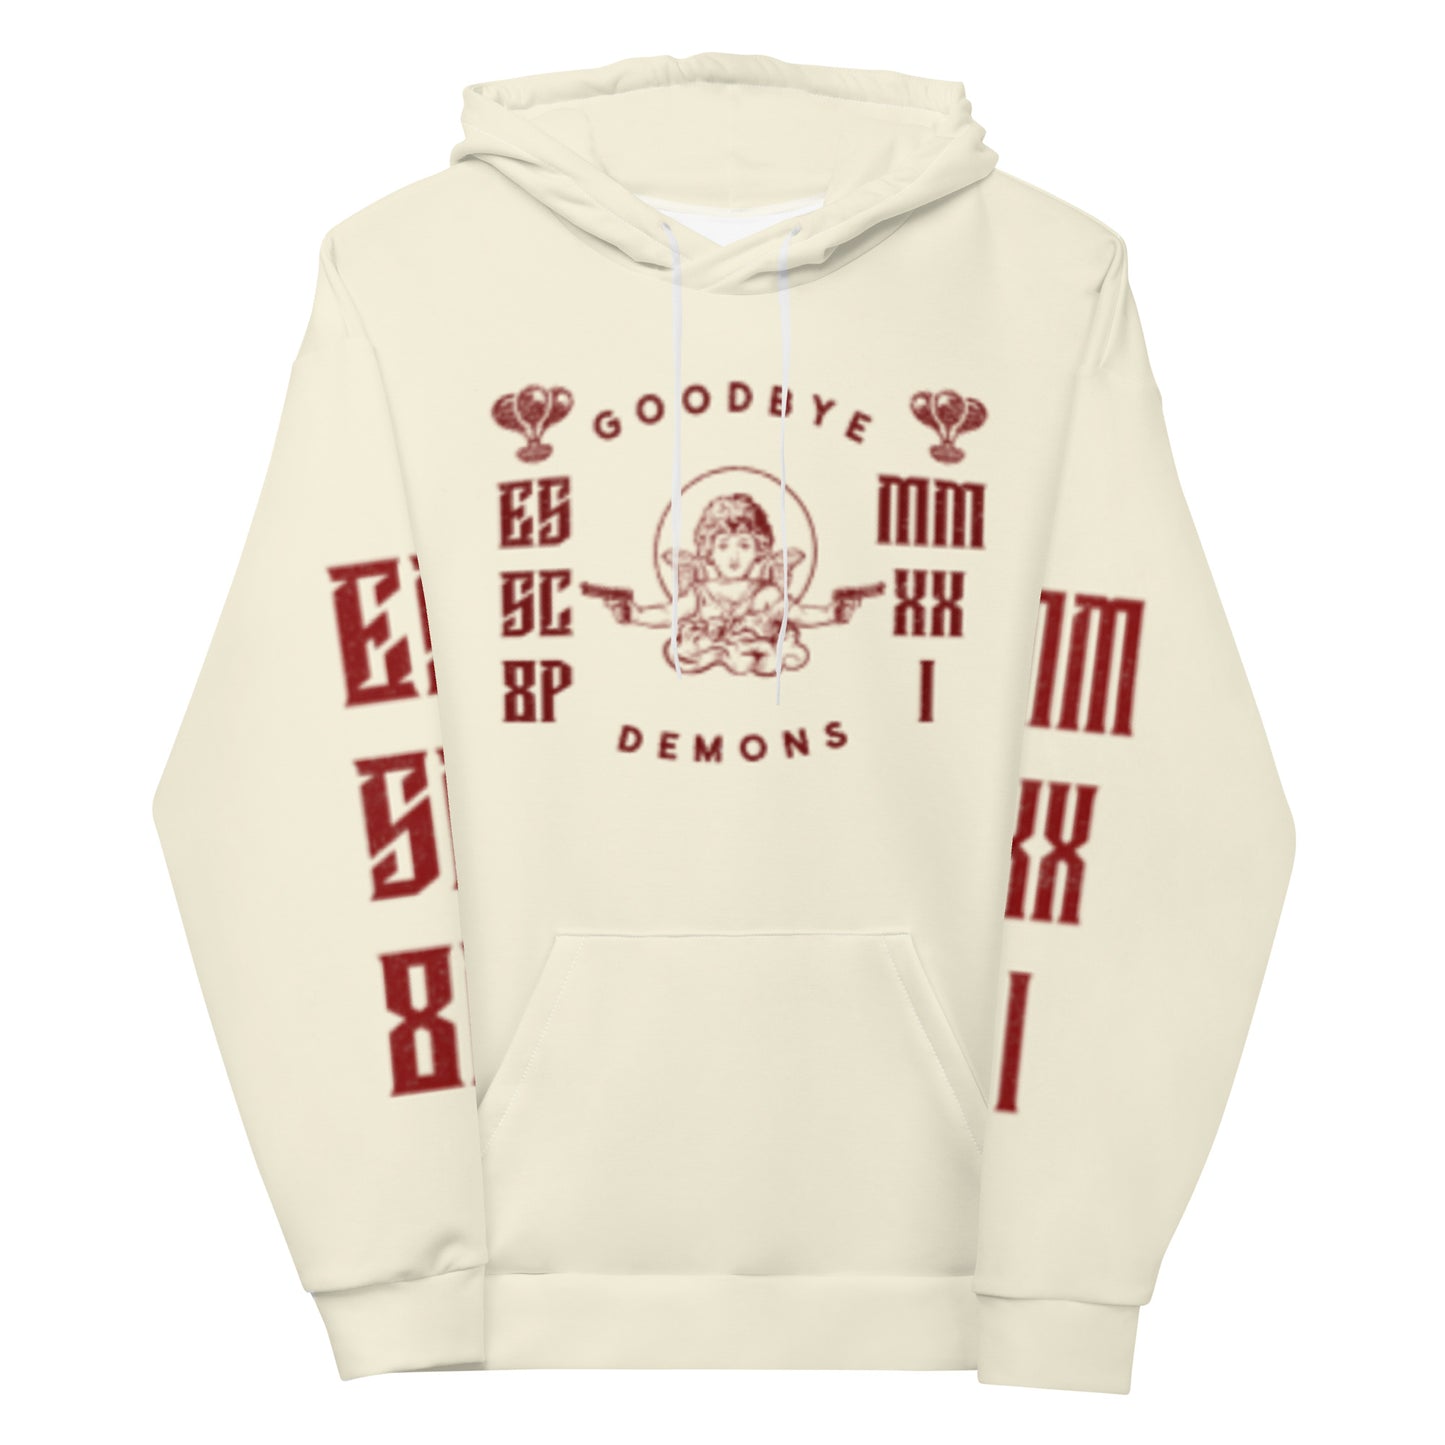 YOUNG ANGEL HOODIE